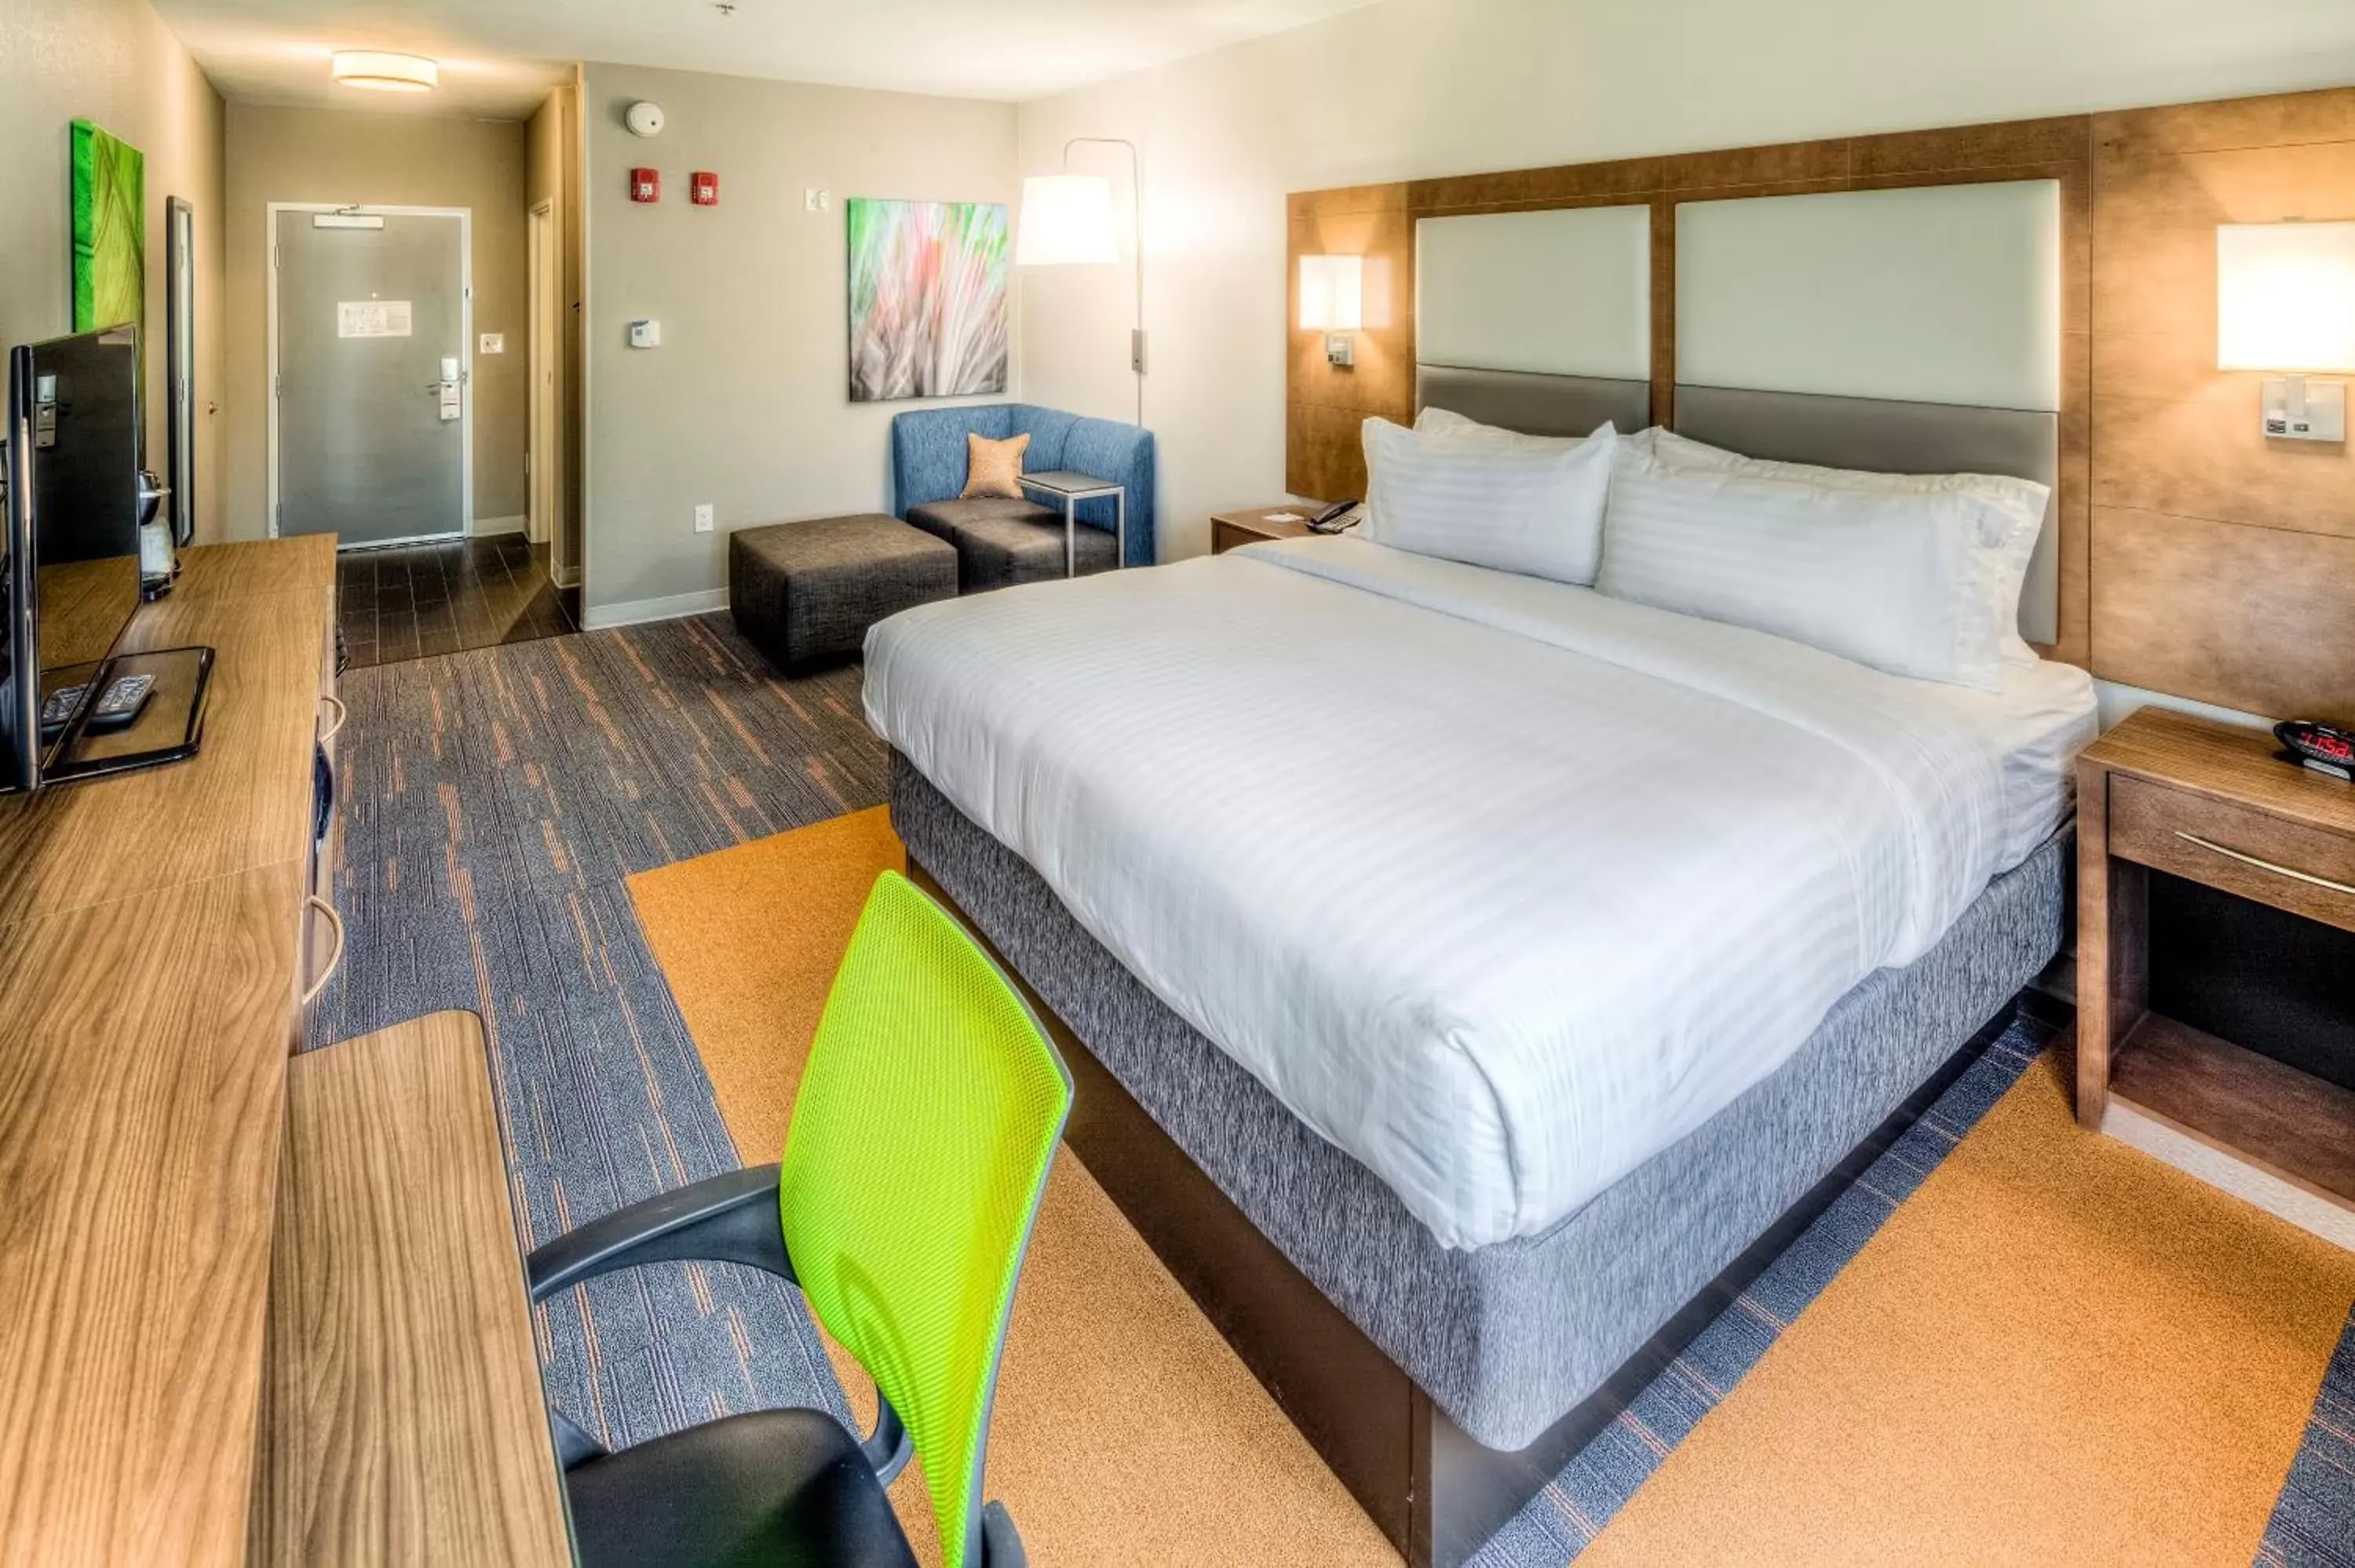 Bed, Room Photo in Holiday Inn Express & Suites Cleveland/Westlake, an IHG Hotel